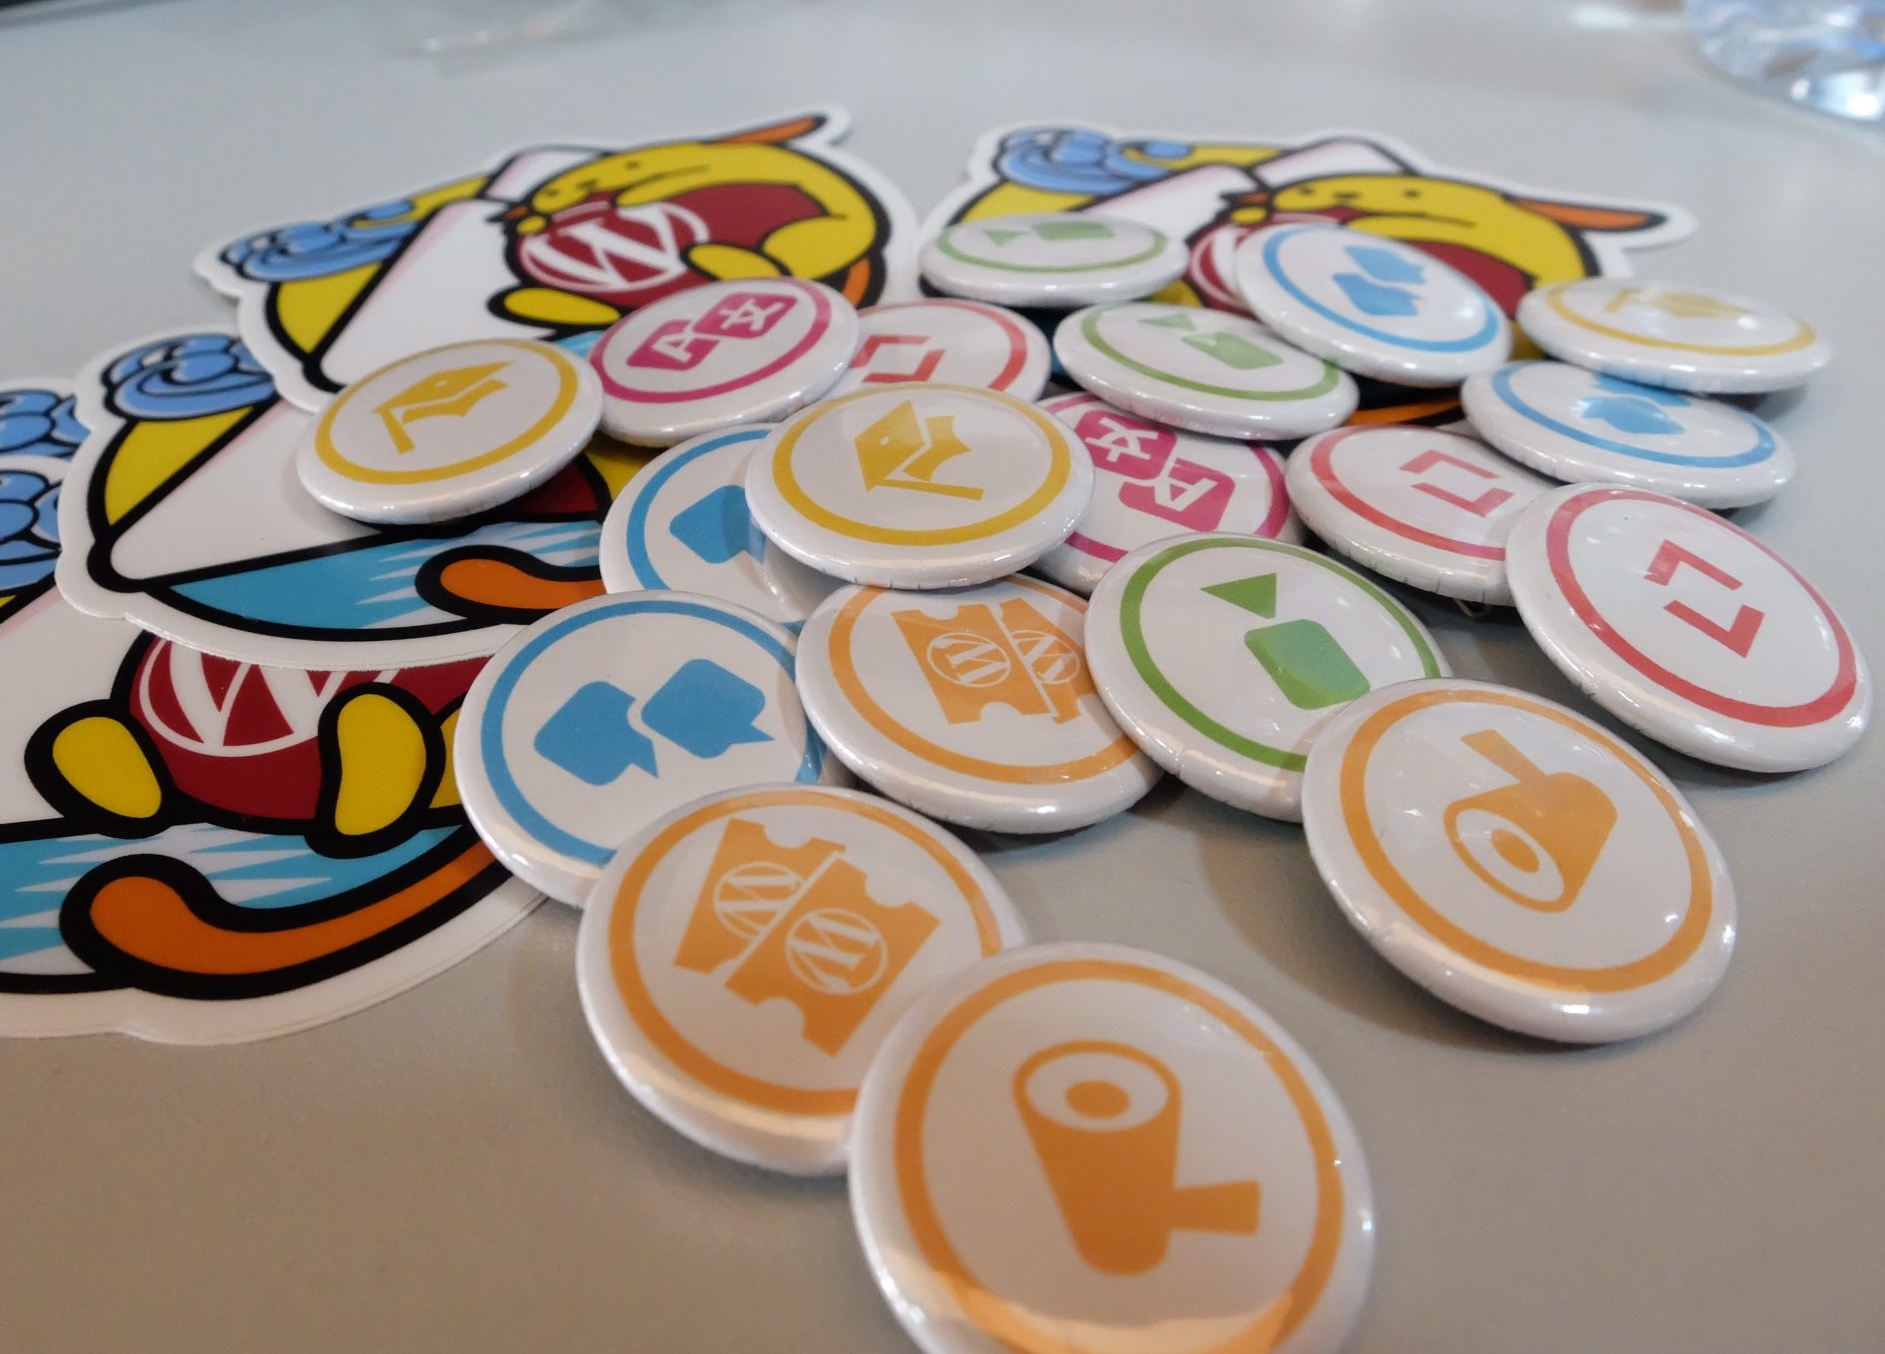 WordPress.org contributor pins and Wapuu stickers on a table. Photo by Pablo Moratinos.